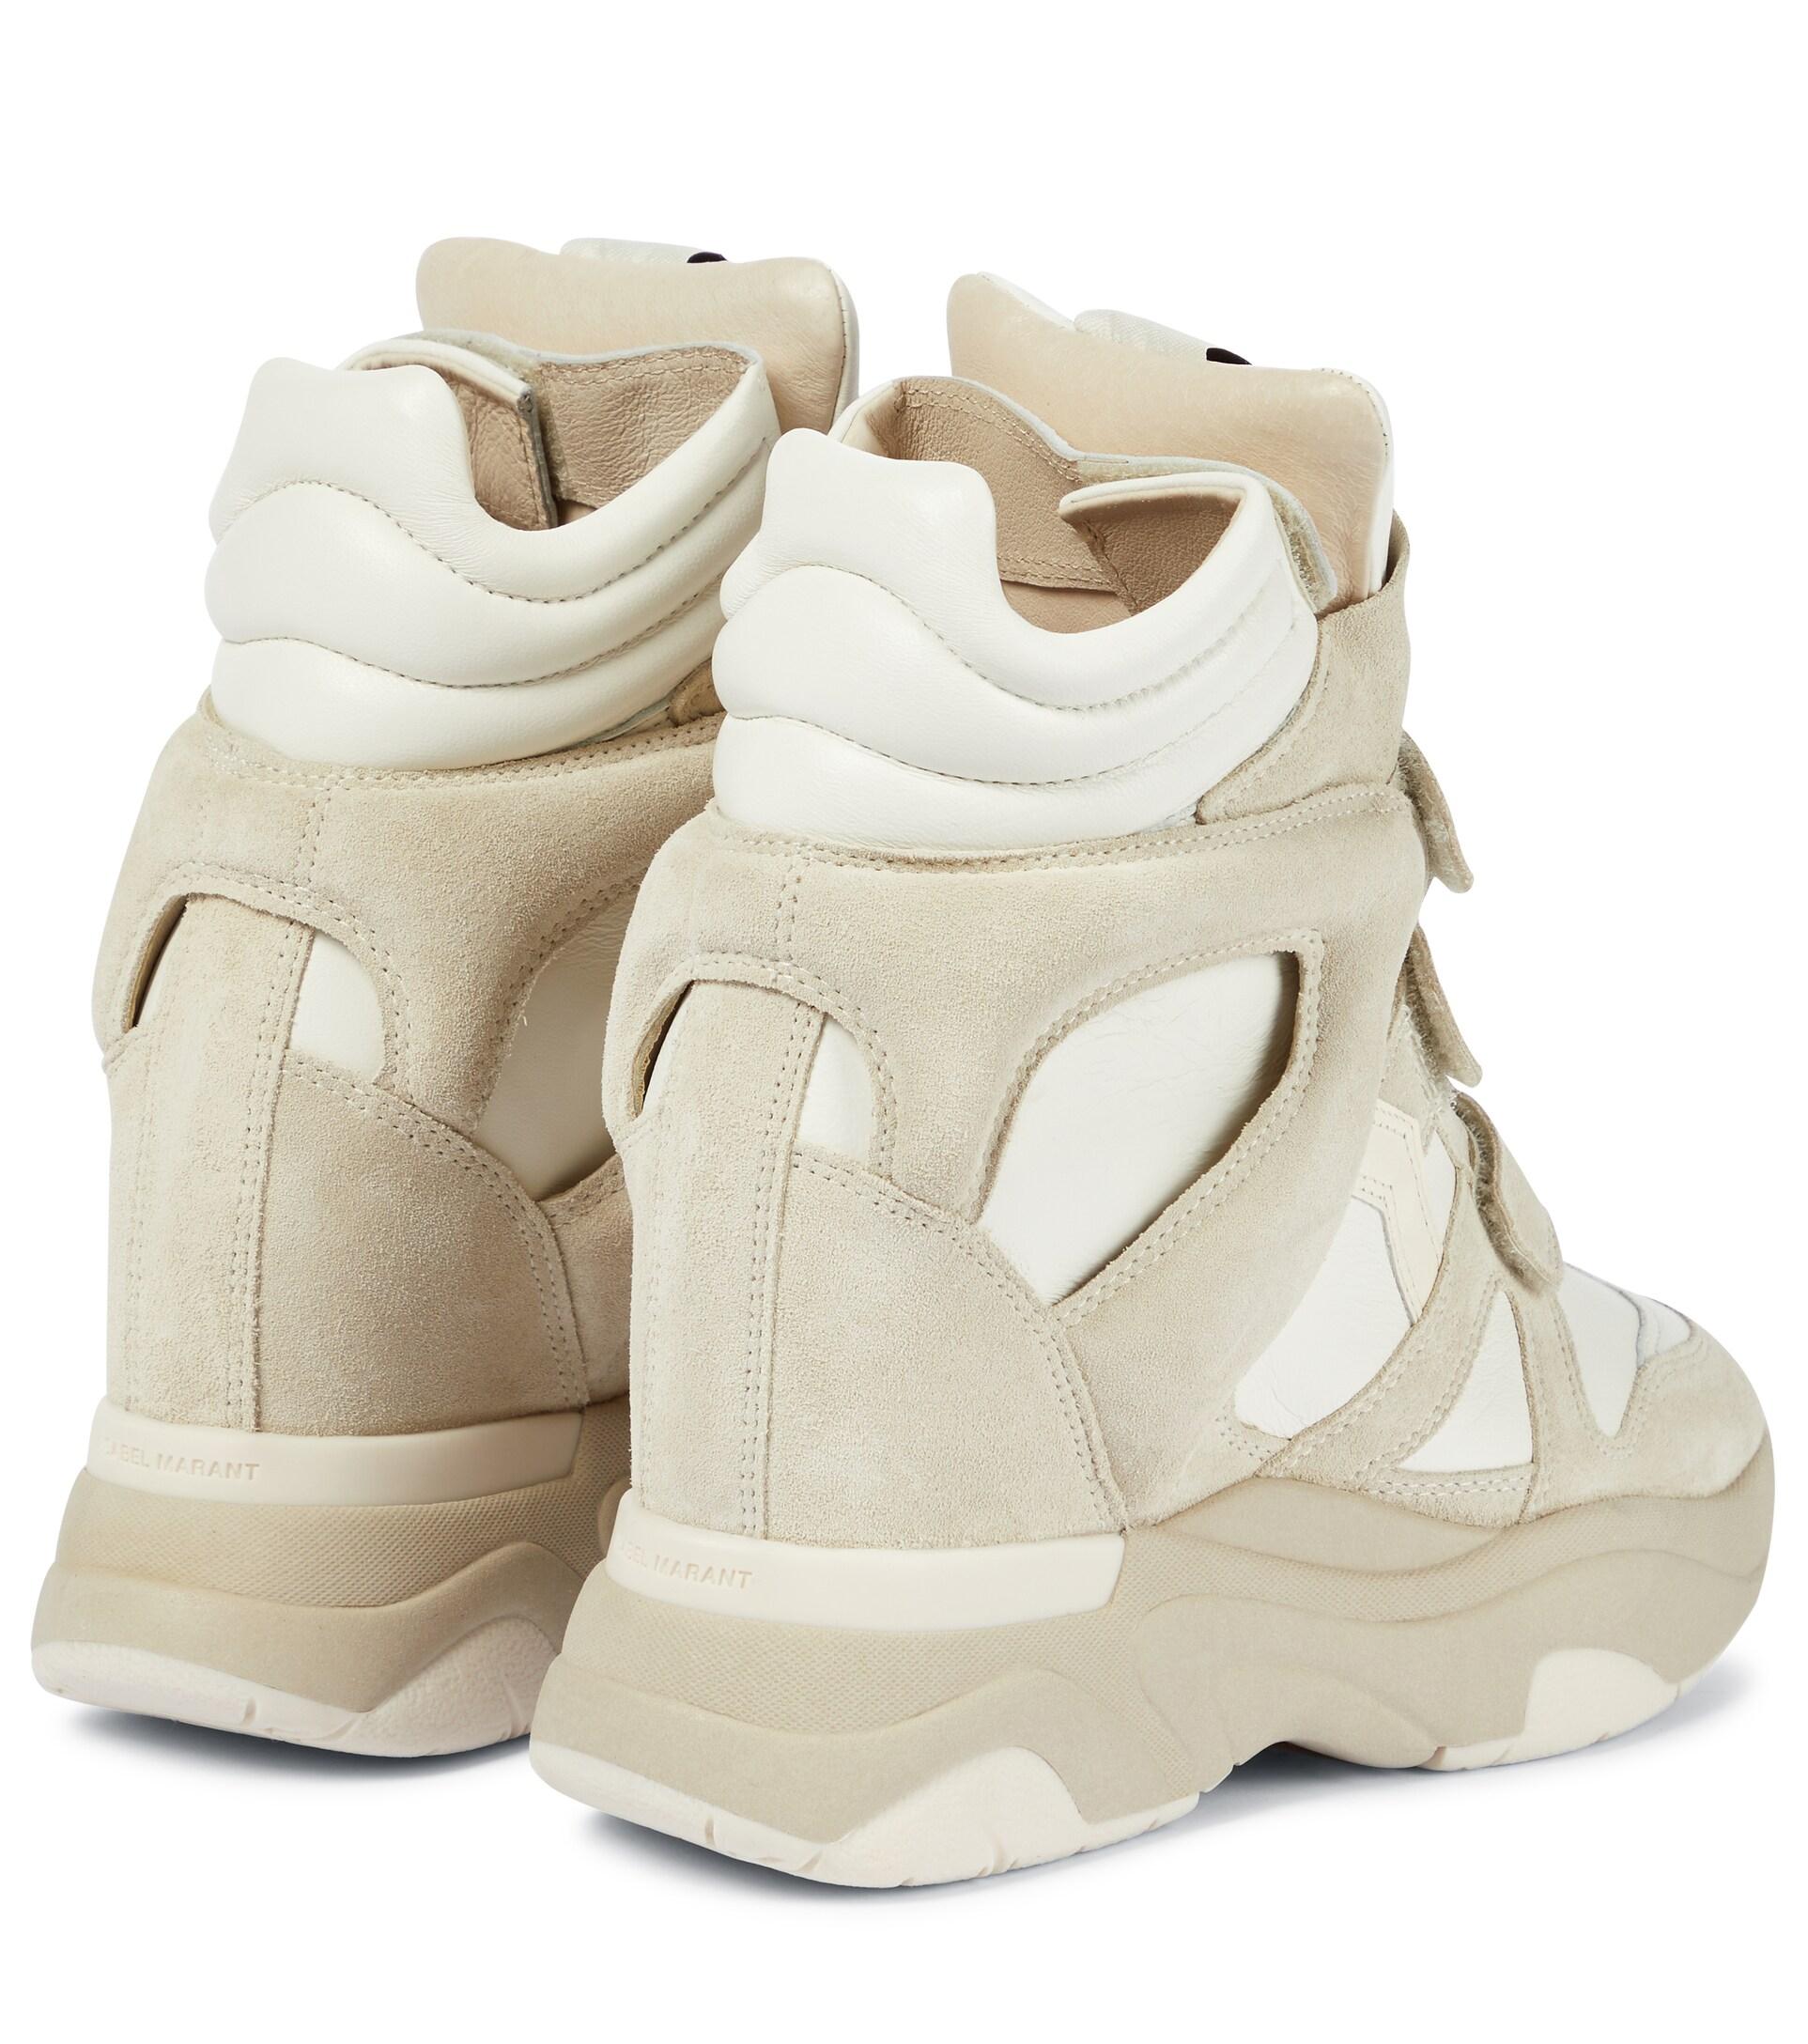 Isabel Marant Balskee Leather Wedge Sneakers in White | Lyst